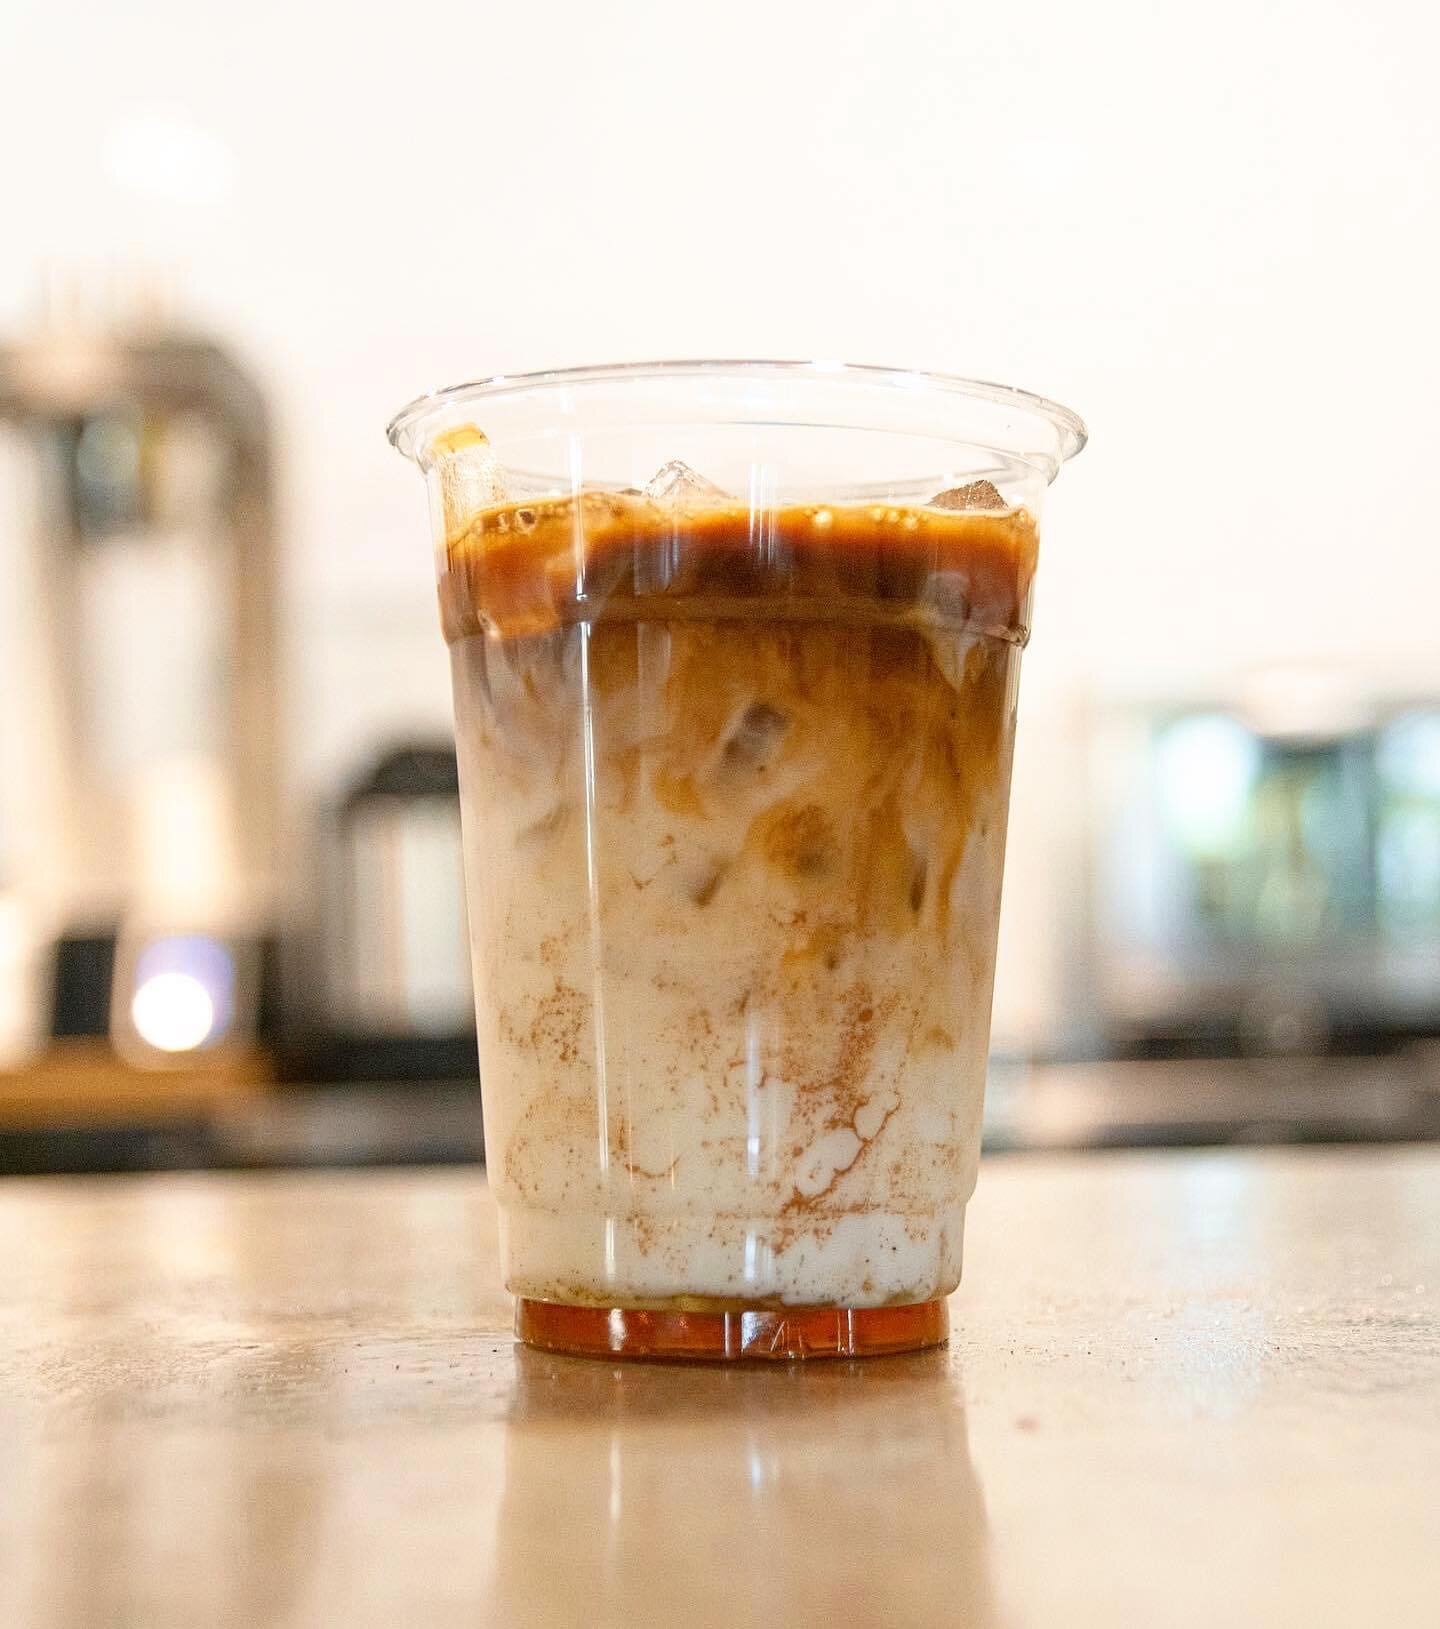 It&rsquo;s Daylight Savings weekend! You&rsquo;re gonna need some caffeine to help you out with that extra hour ;) Might go for something iced today though 🥵

#coffee #coffeeshop #community #coffeebeans #coffeenotes #coffeetasting #espresso #slowcof